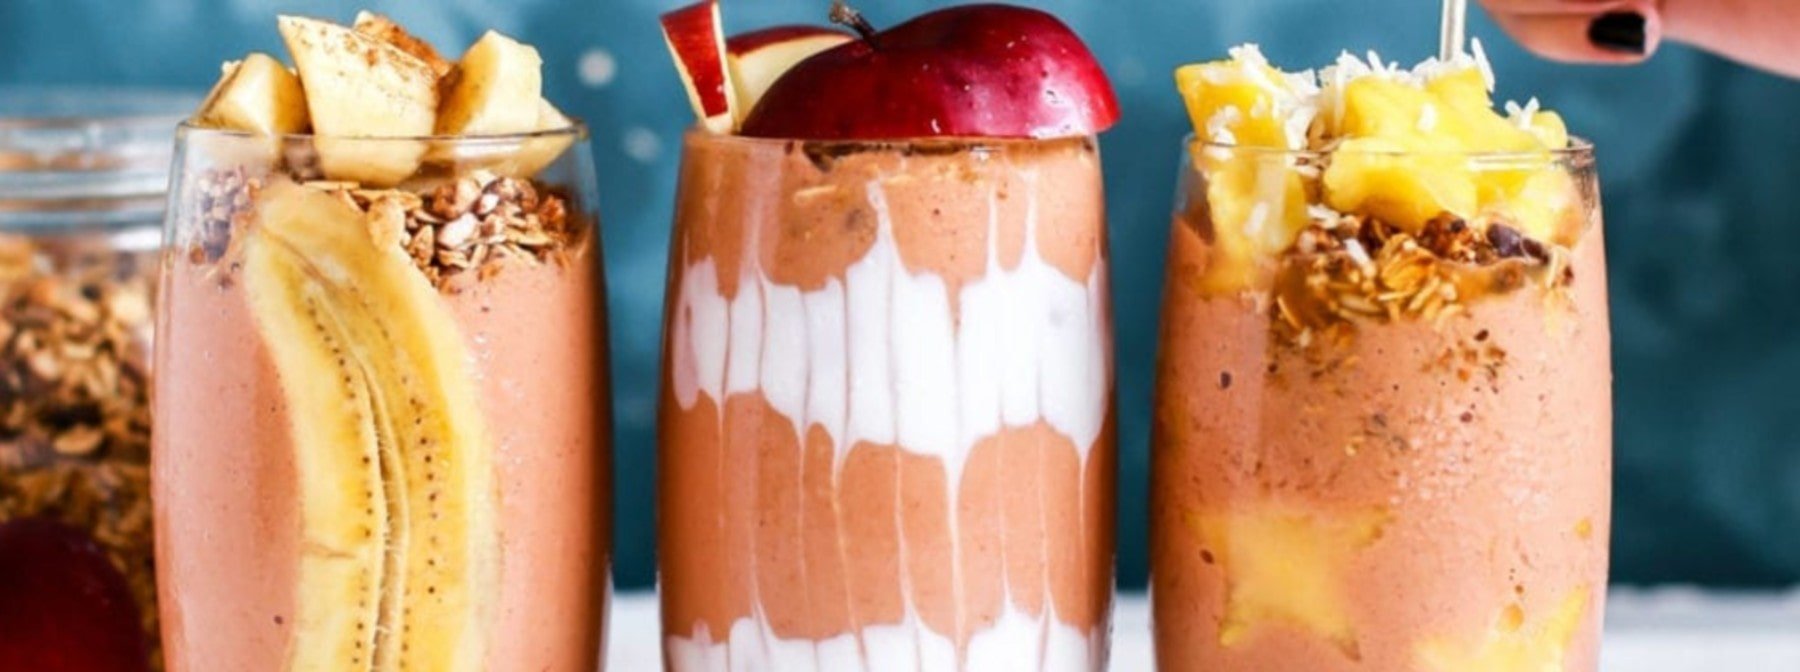 High Calorie Shakes | Our Top 11 Recipes & Blends